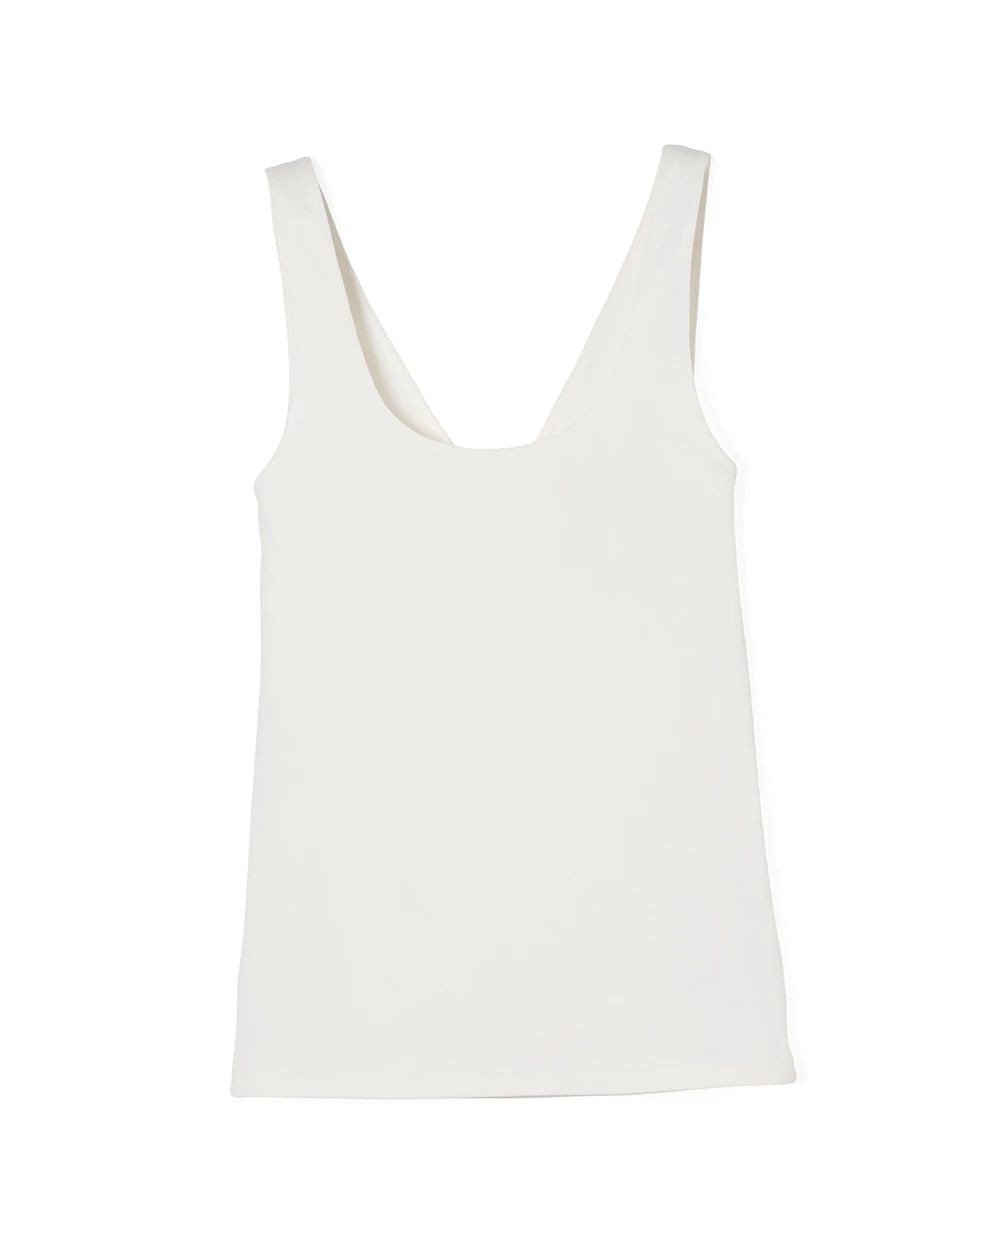 WHBM® FORME Dual Neck Tank click to view larger image.